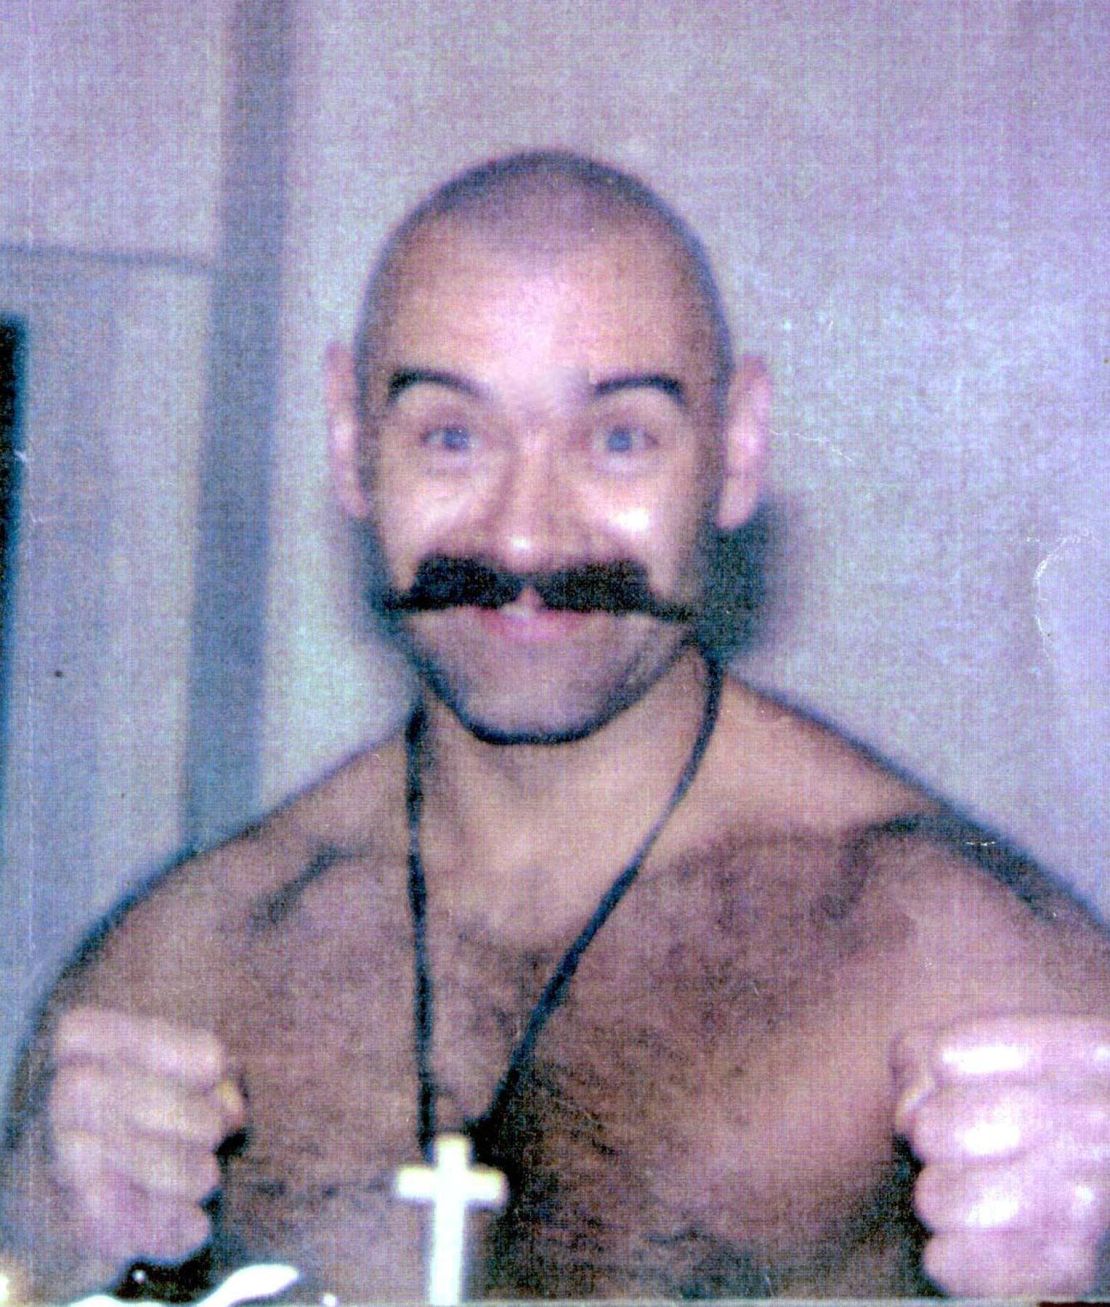 File photograph of Salvador, sporting his most famous look, the shaved head and moustache. 
